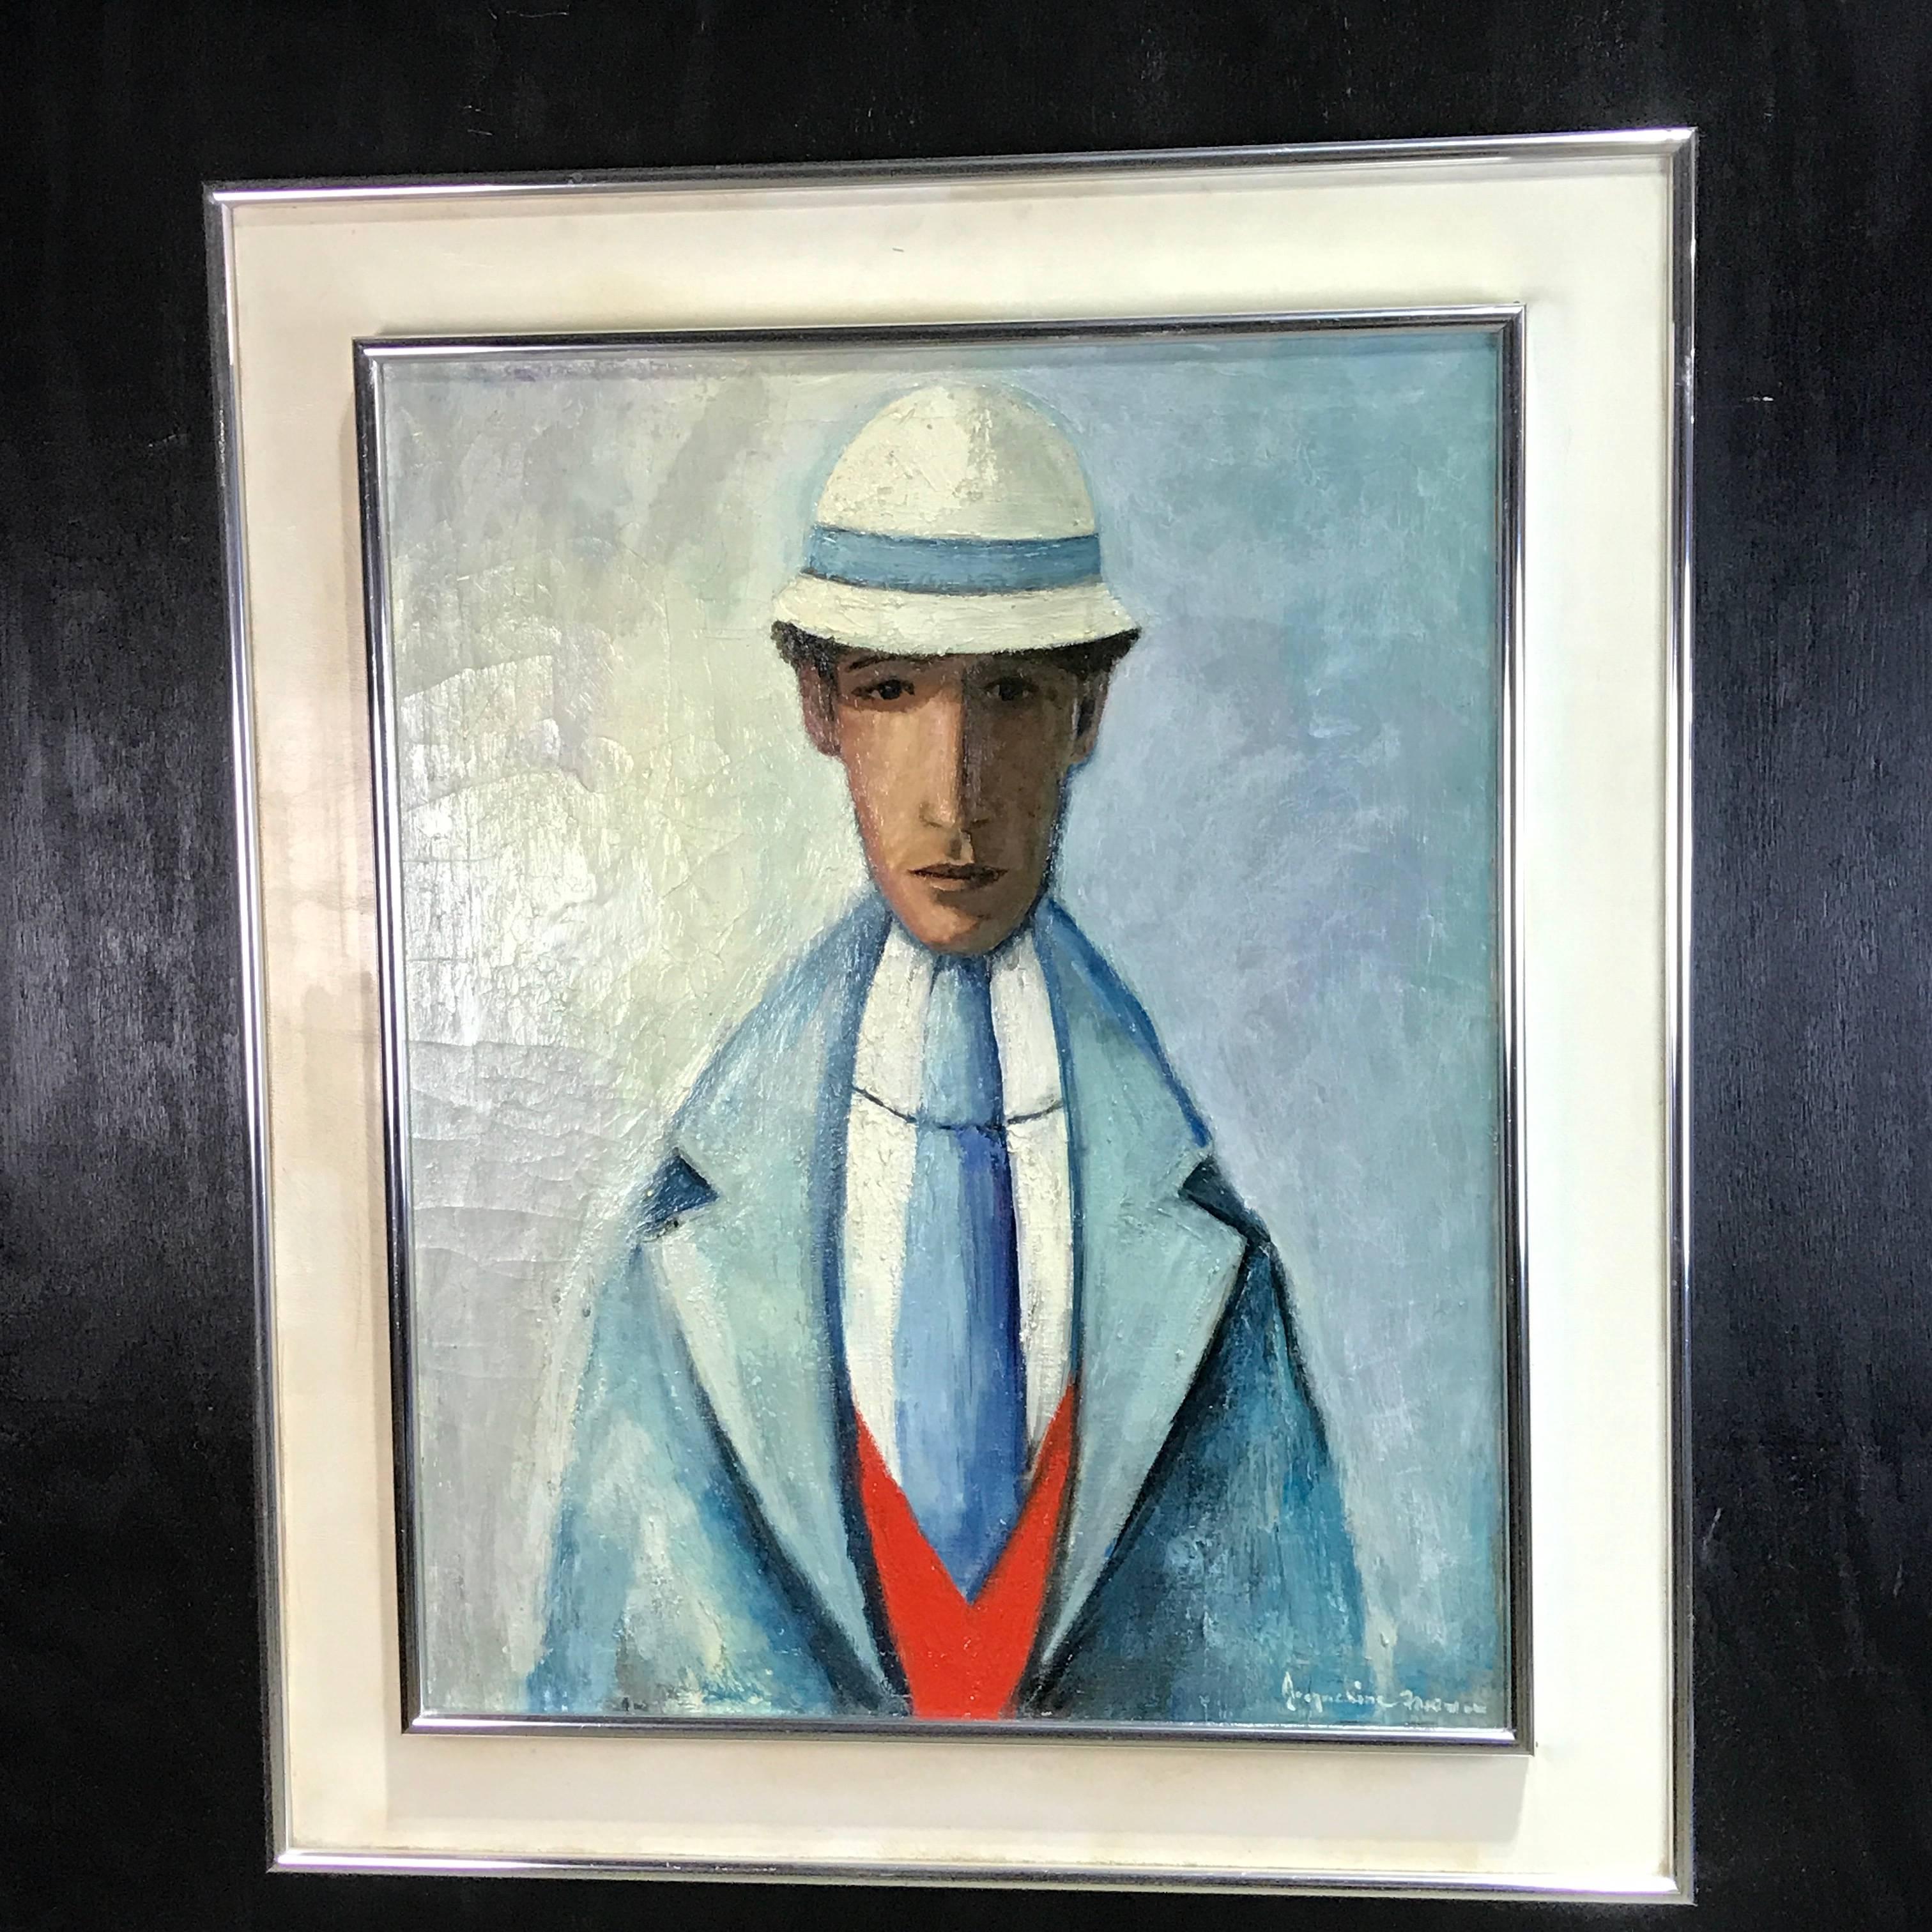 Mid-20th Century French Midcentury Portrait of a Man by Jacqueline Fromenteau